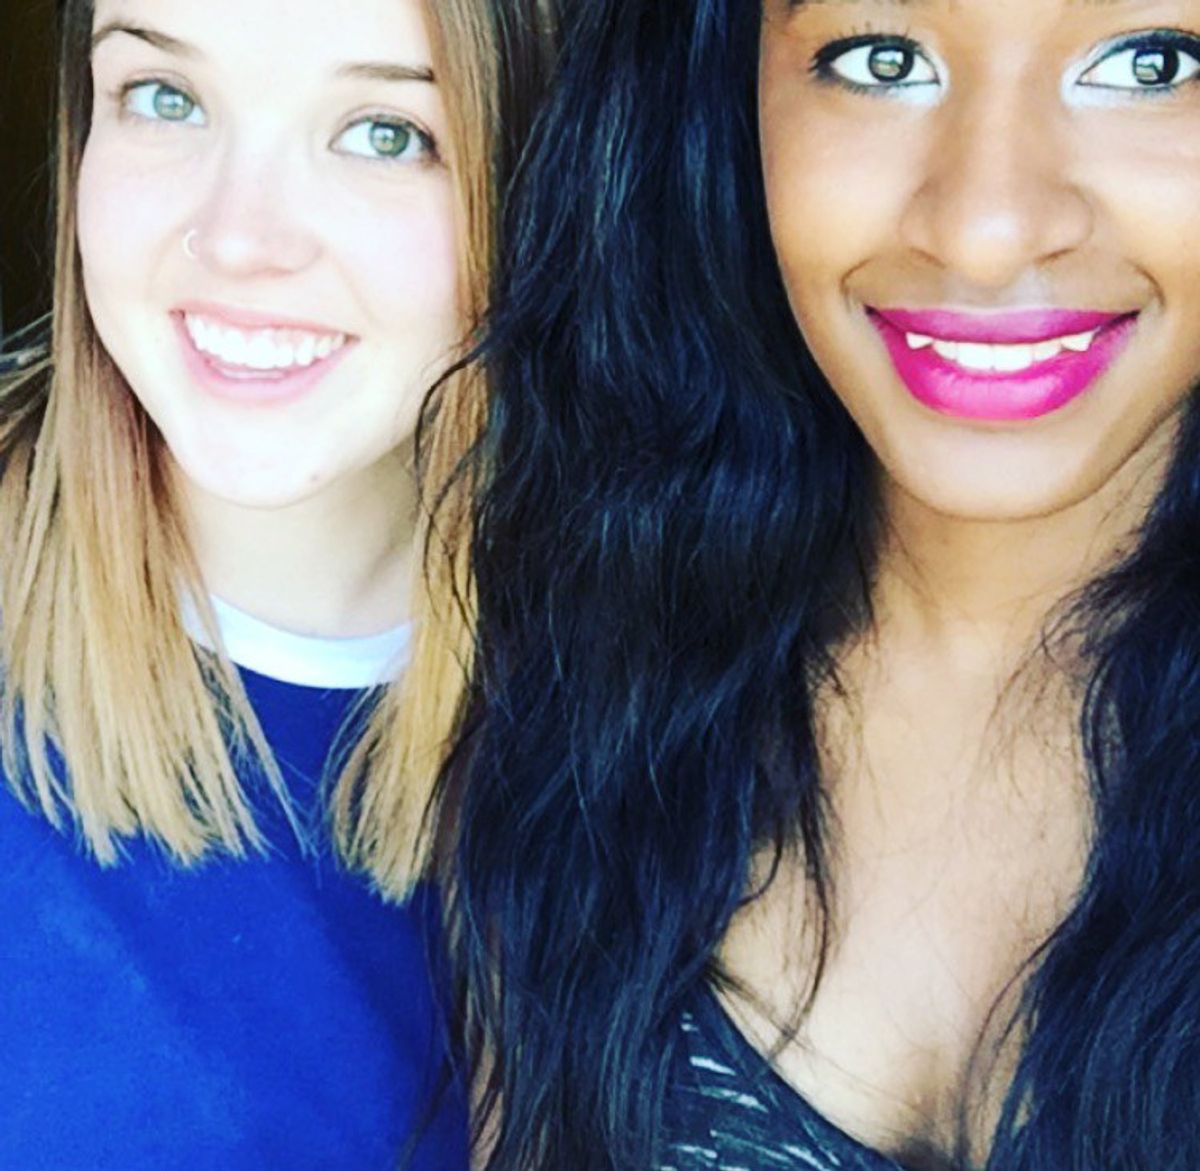 9 Things My Best Friend Needs To Hear